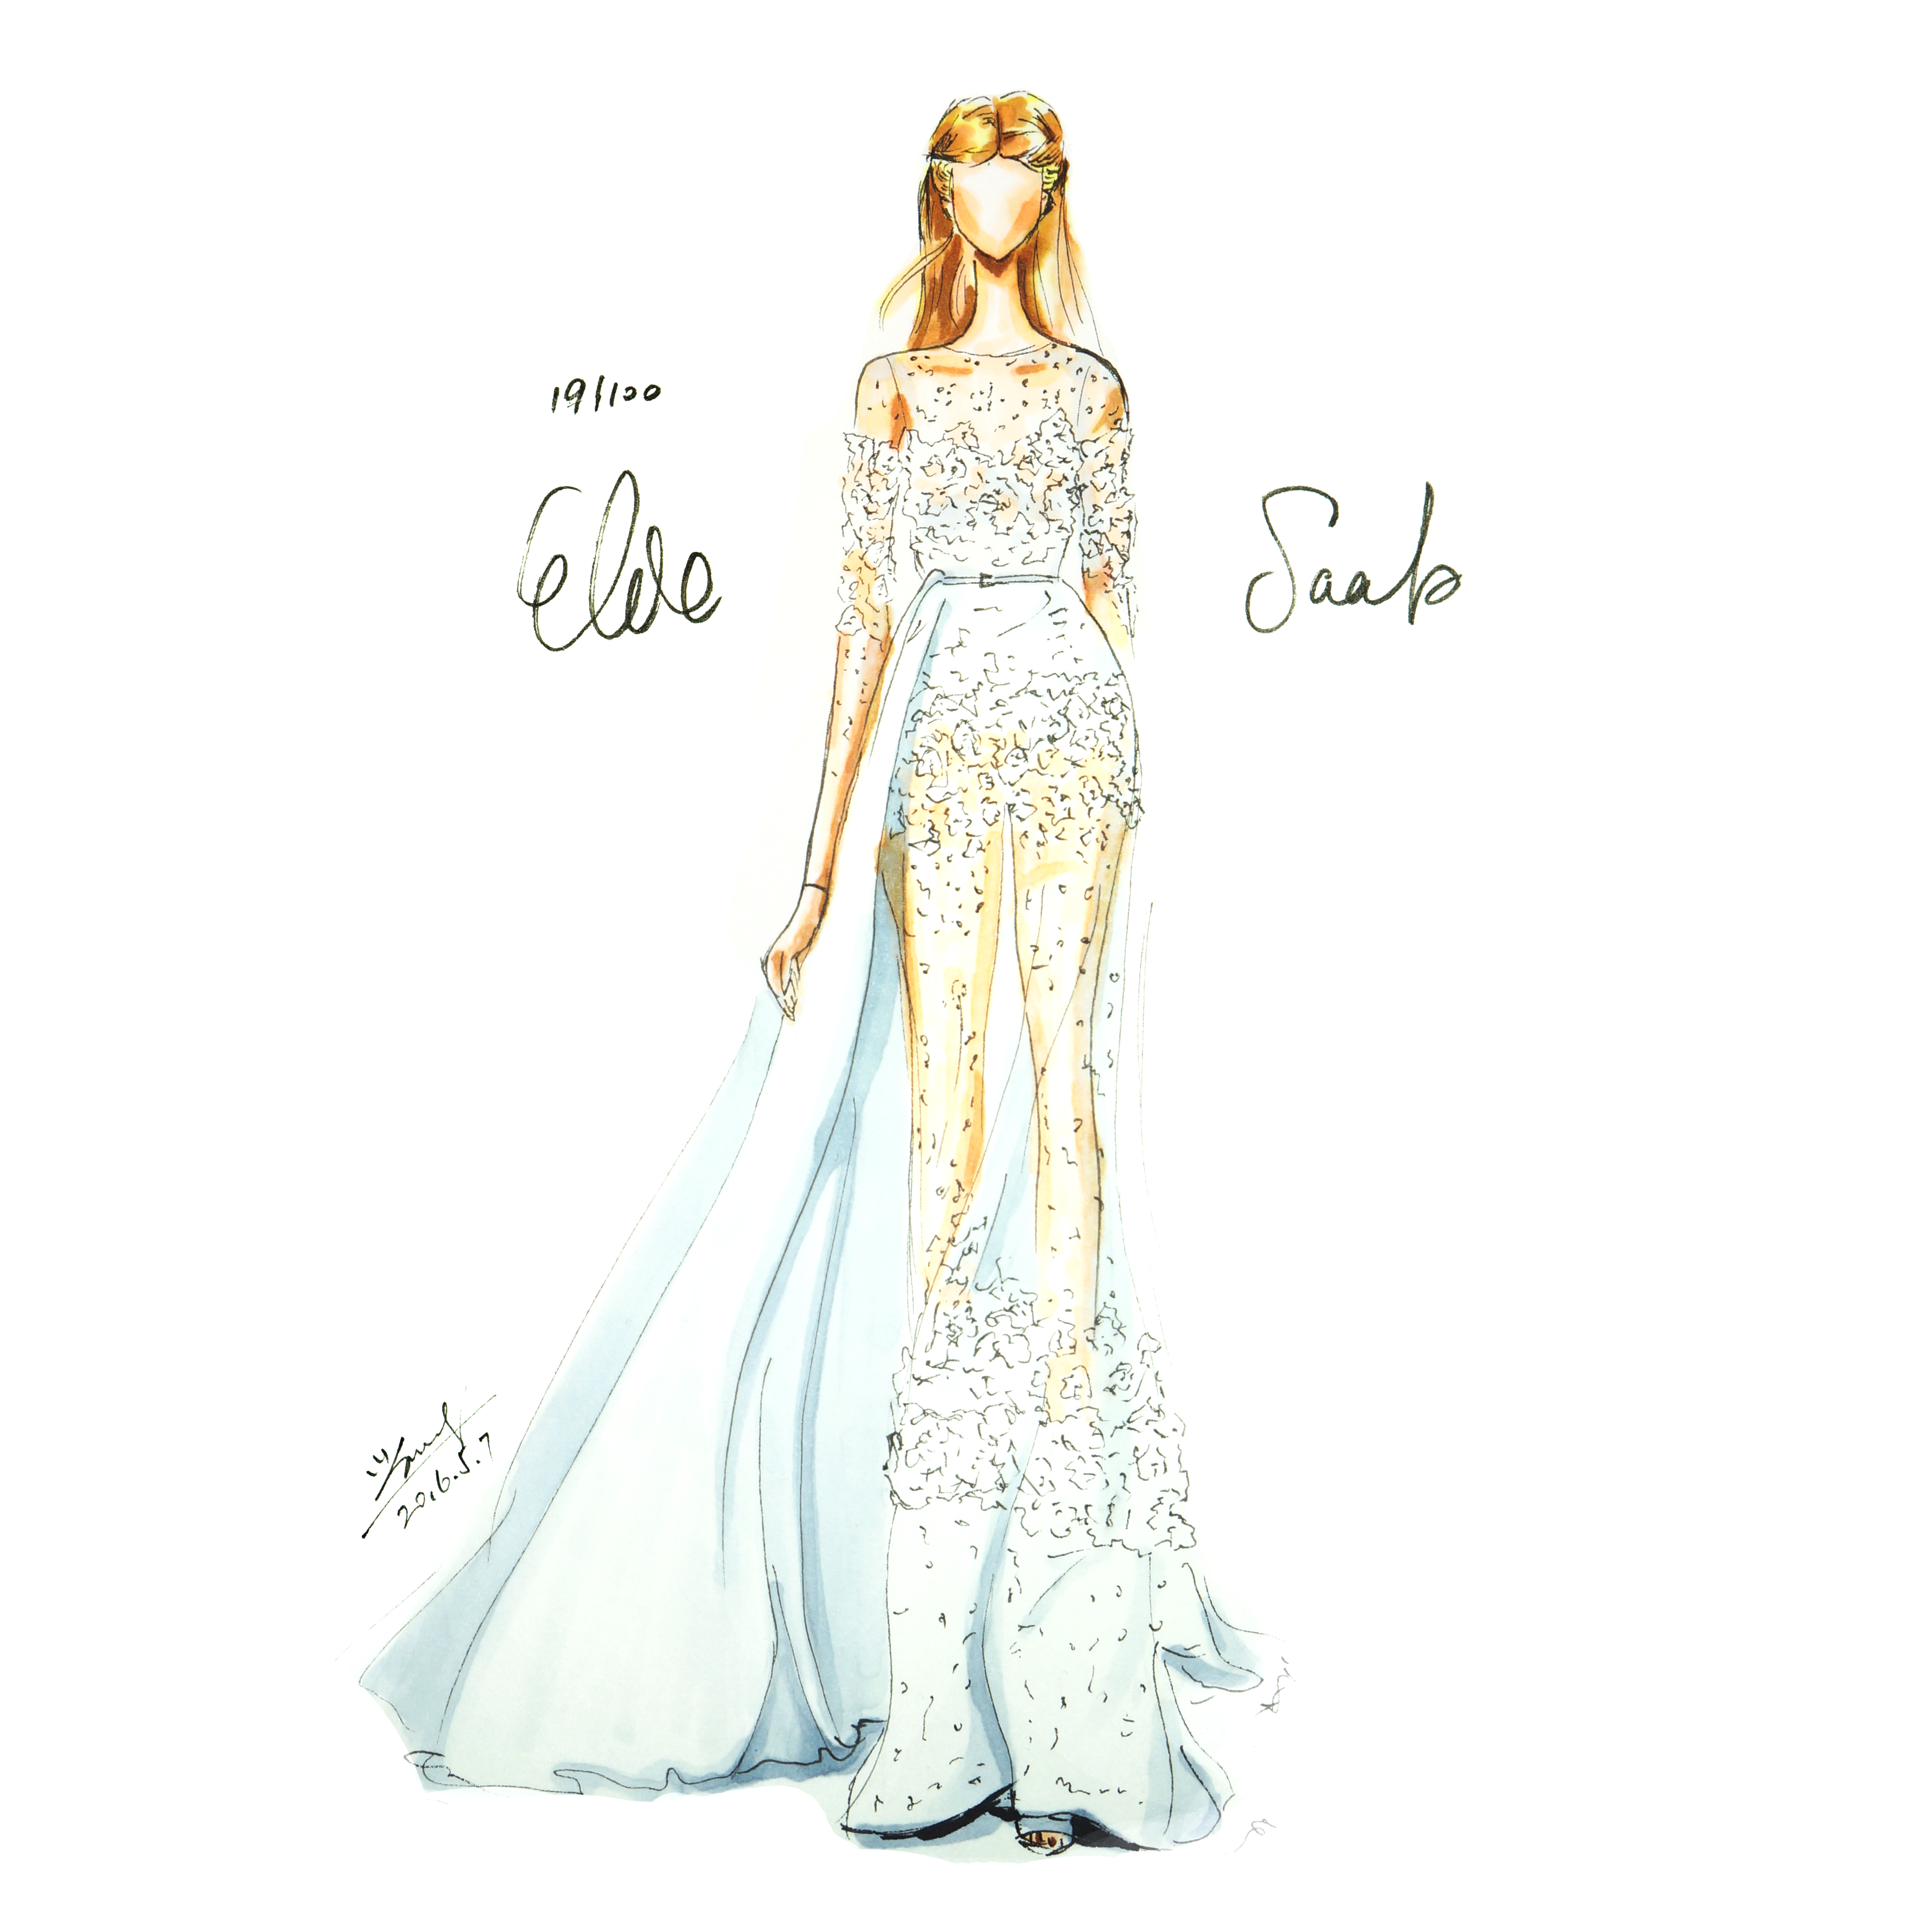 Dribbble - 19_elie_saab_2.png by Sunny Wang